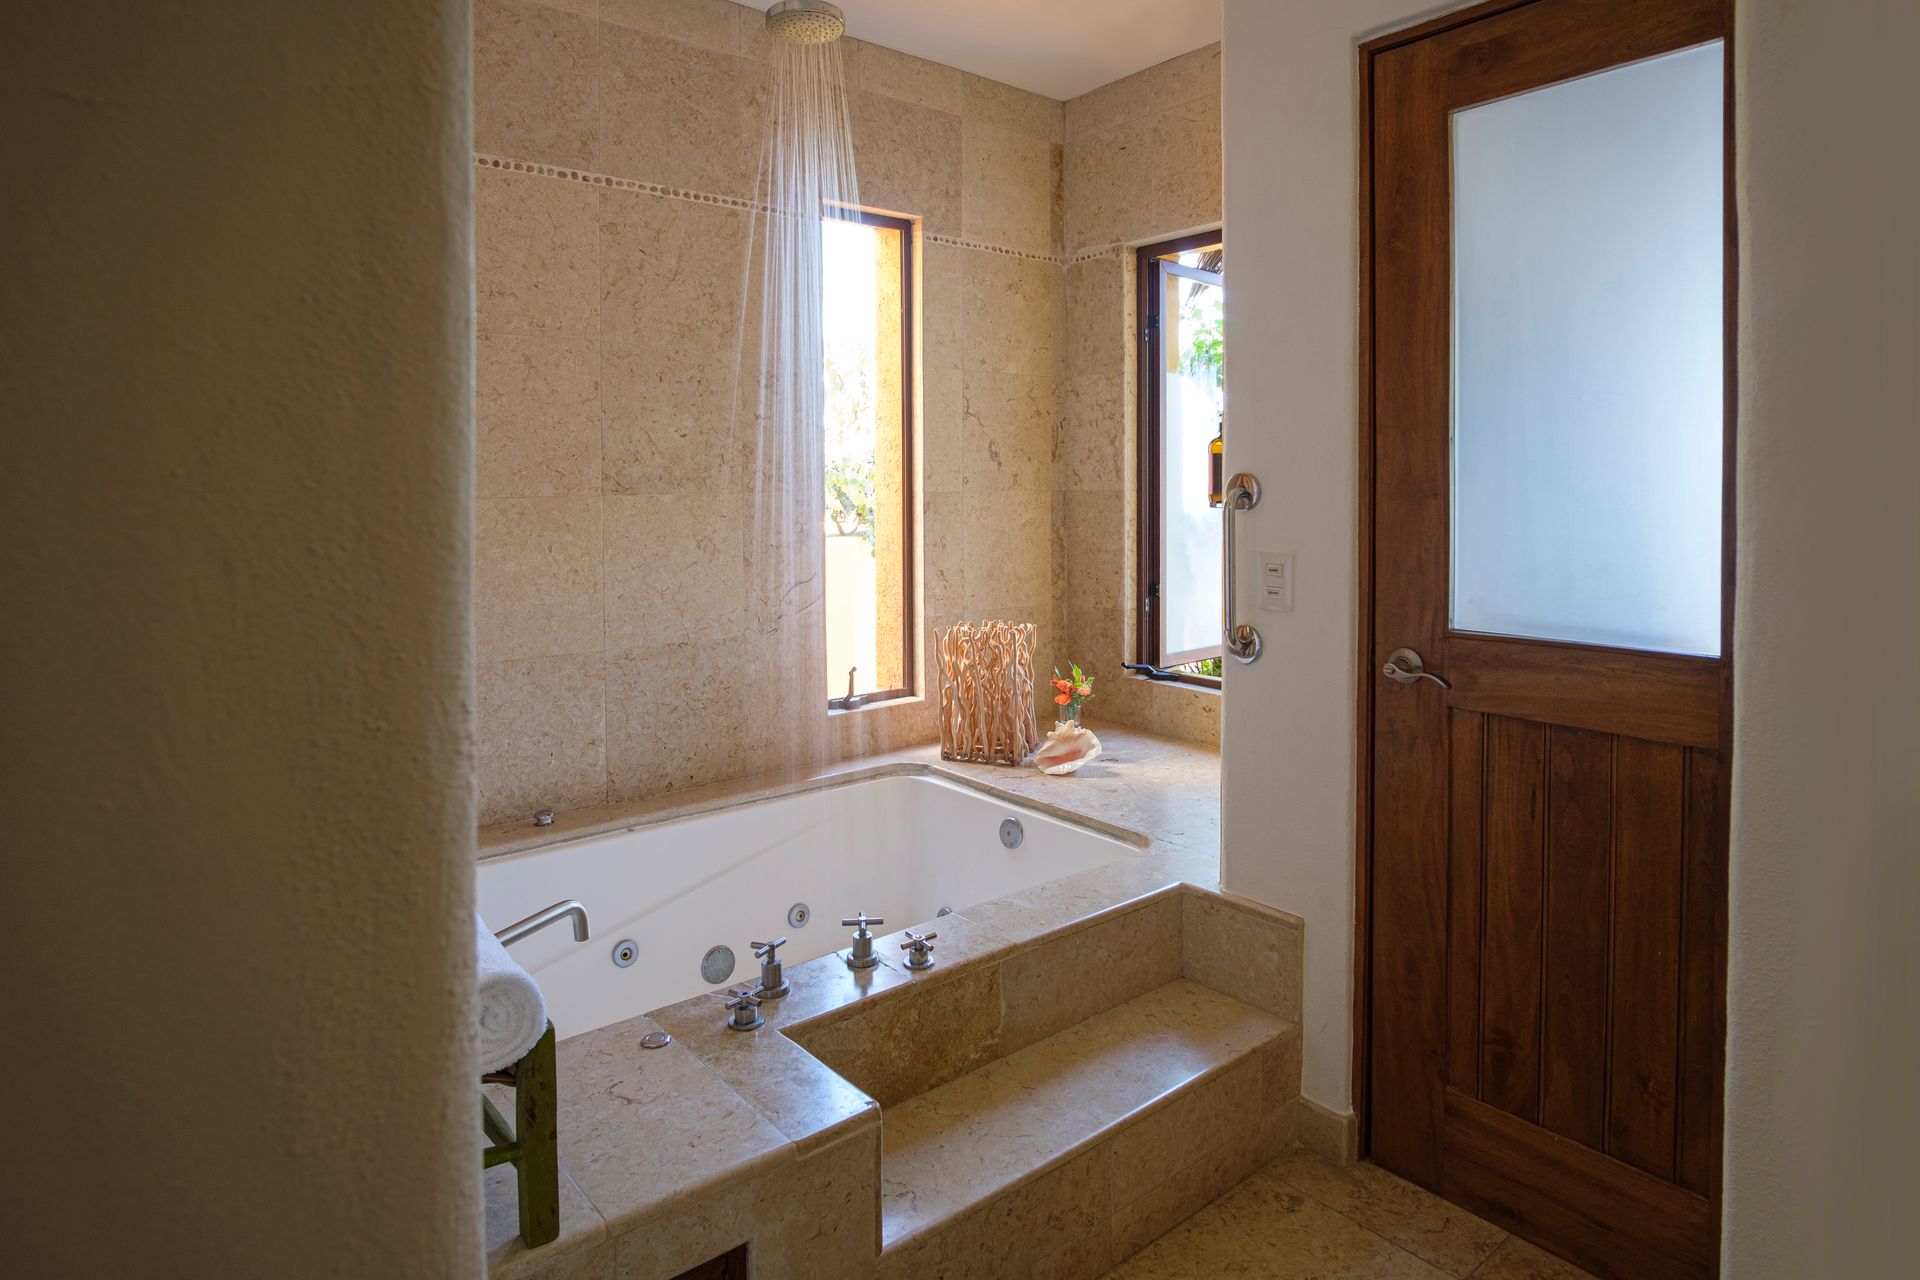 a bathroom with a jacuzzi tub and a wooden door